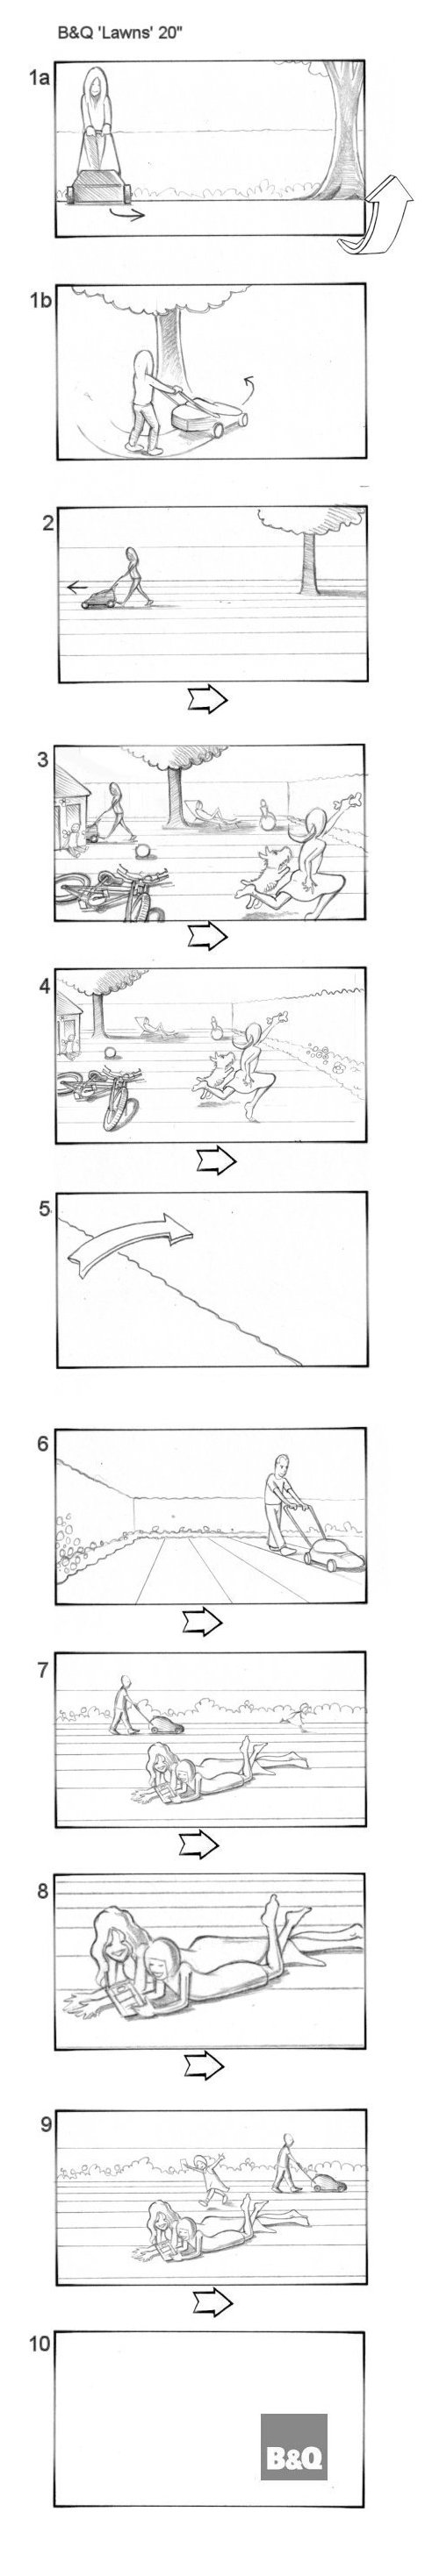 B&Q SUMMER CAMPAIGN STORYBOARDS BY ANDY SPARROW